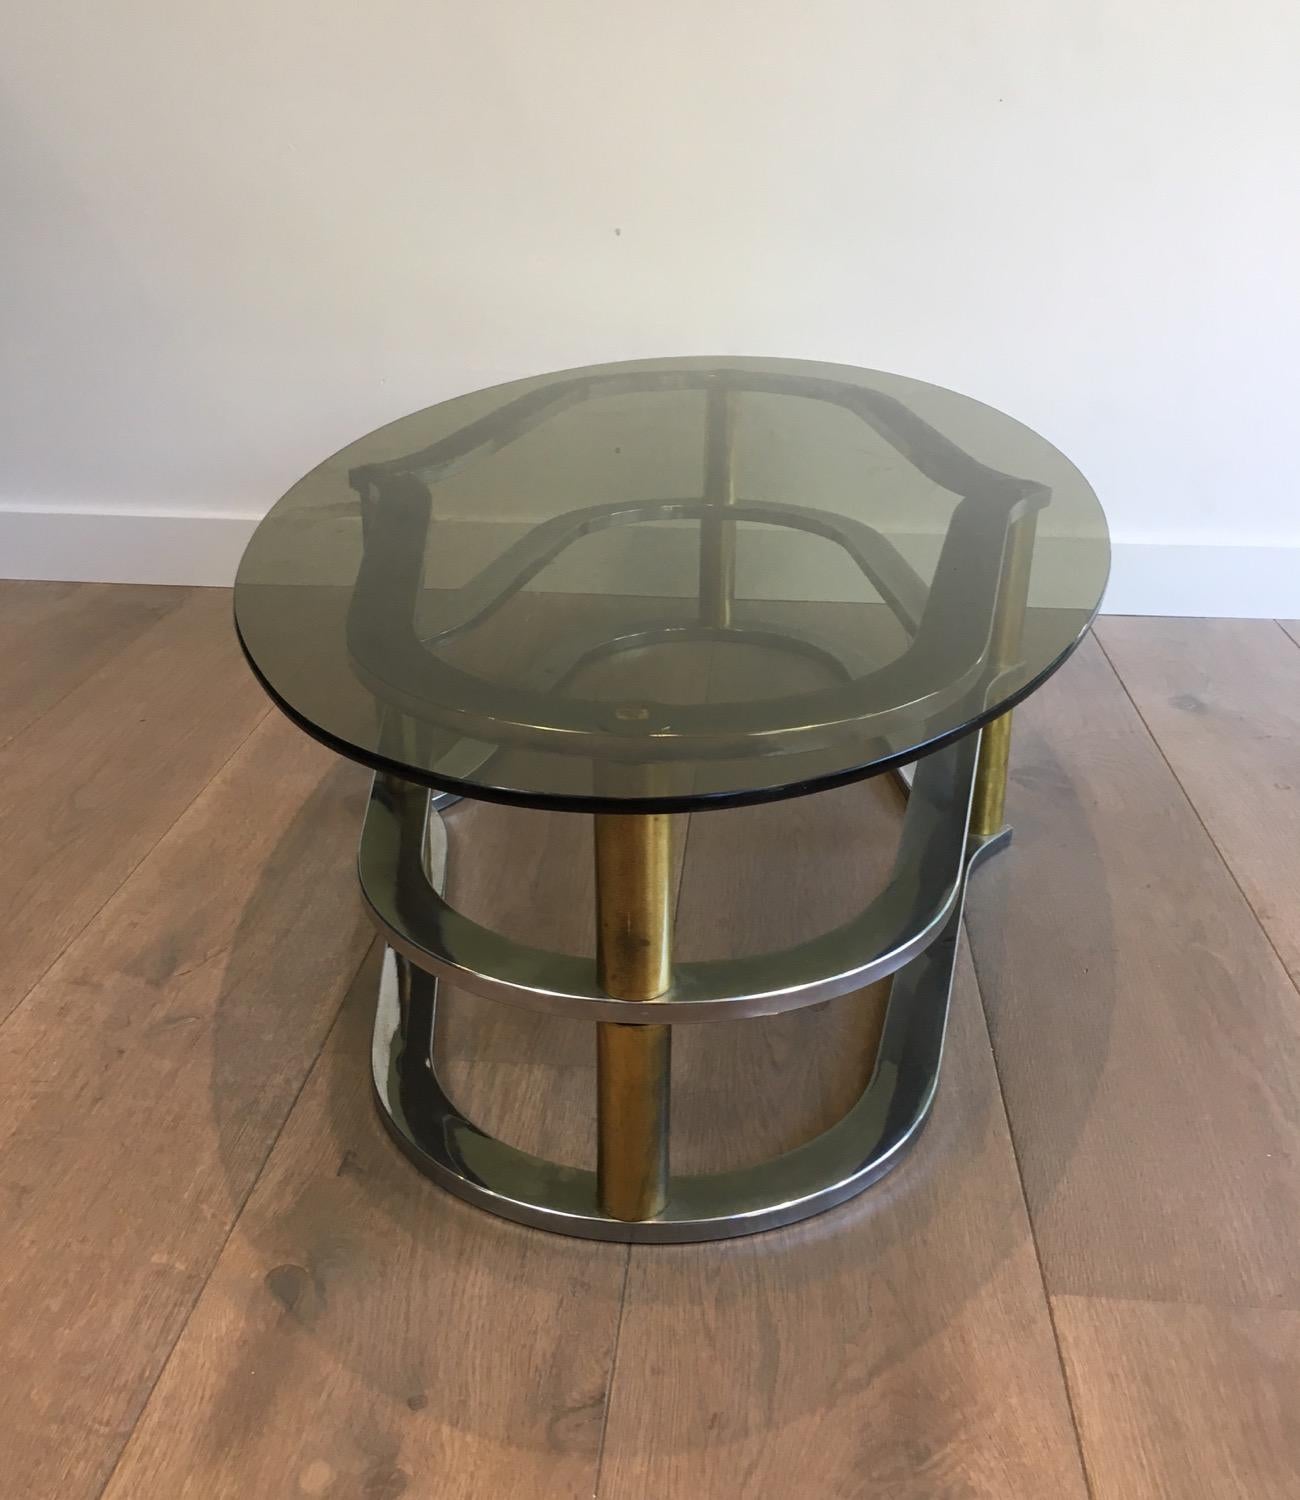 Unusual Gold Gilt Brass and Chrome Design Coffee Table, French, circa 1960 For Sale 4